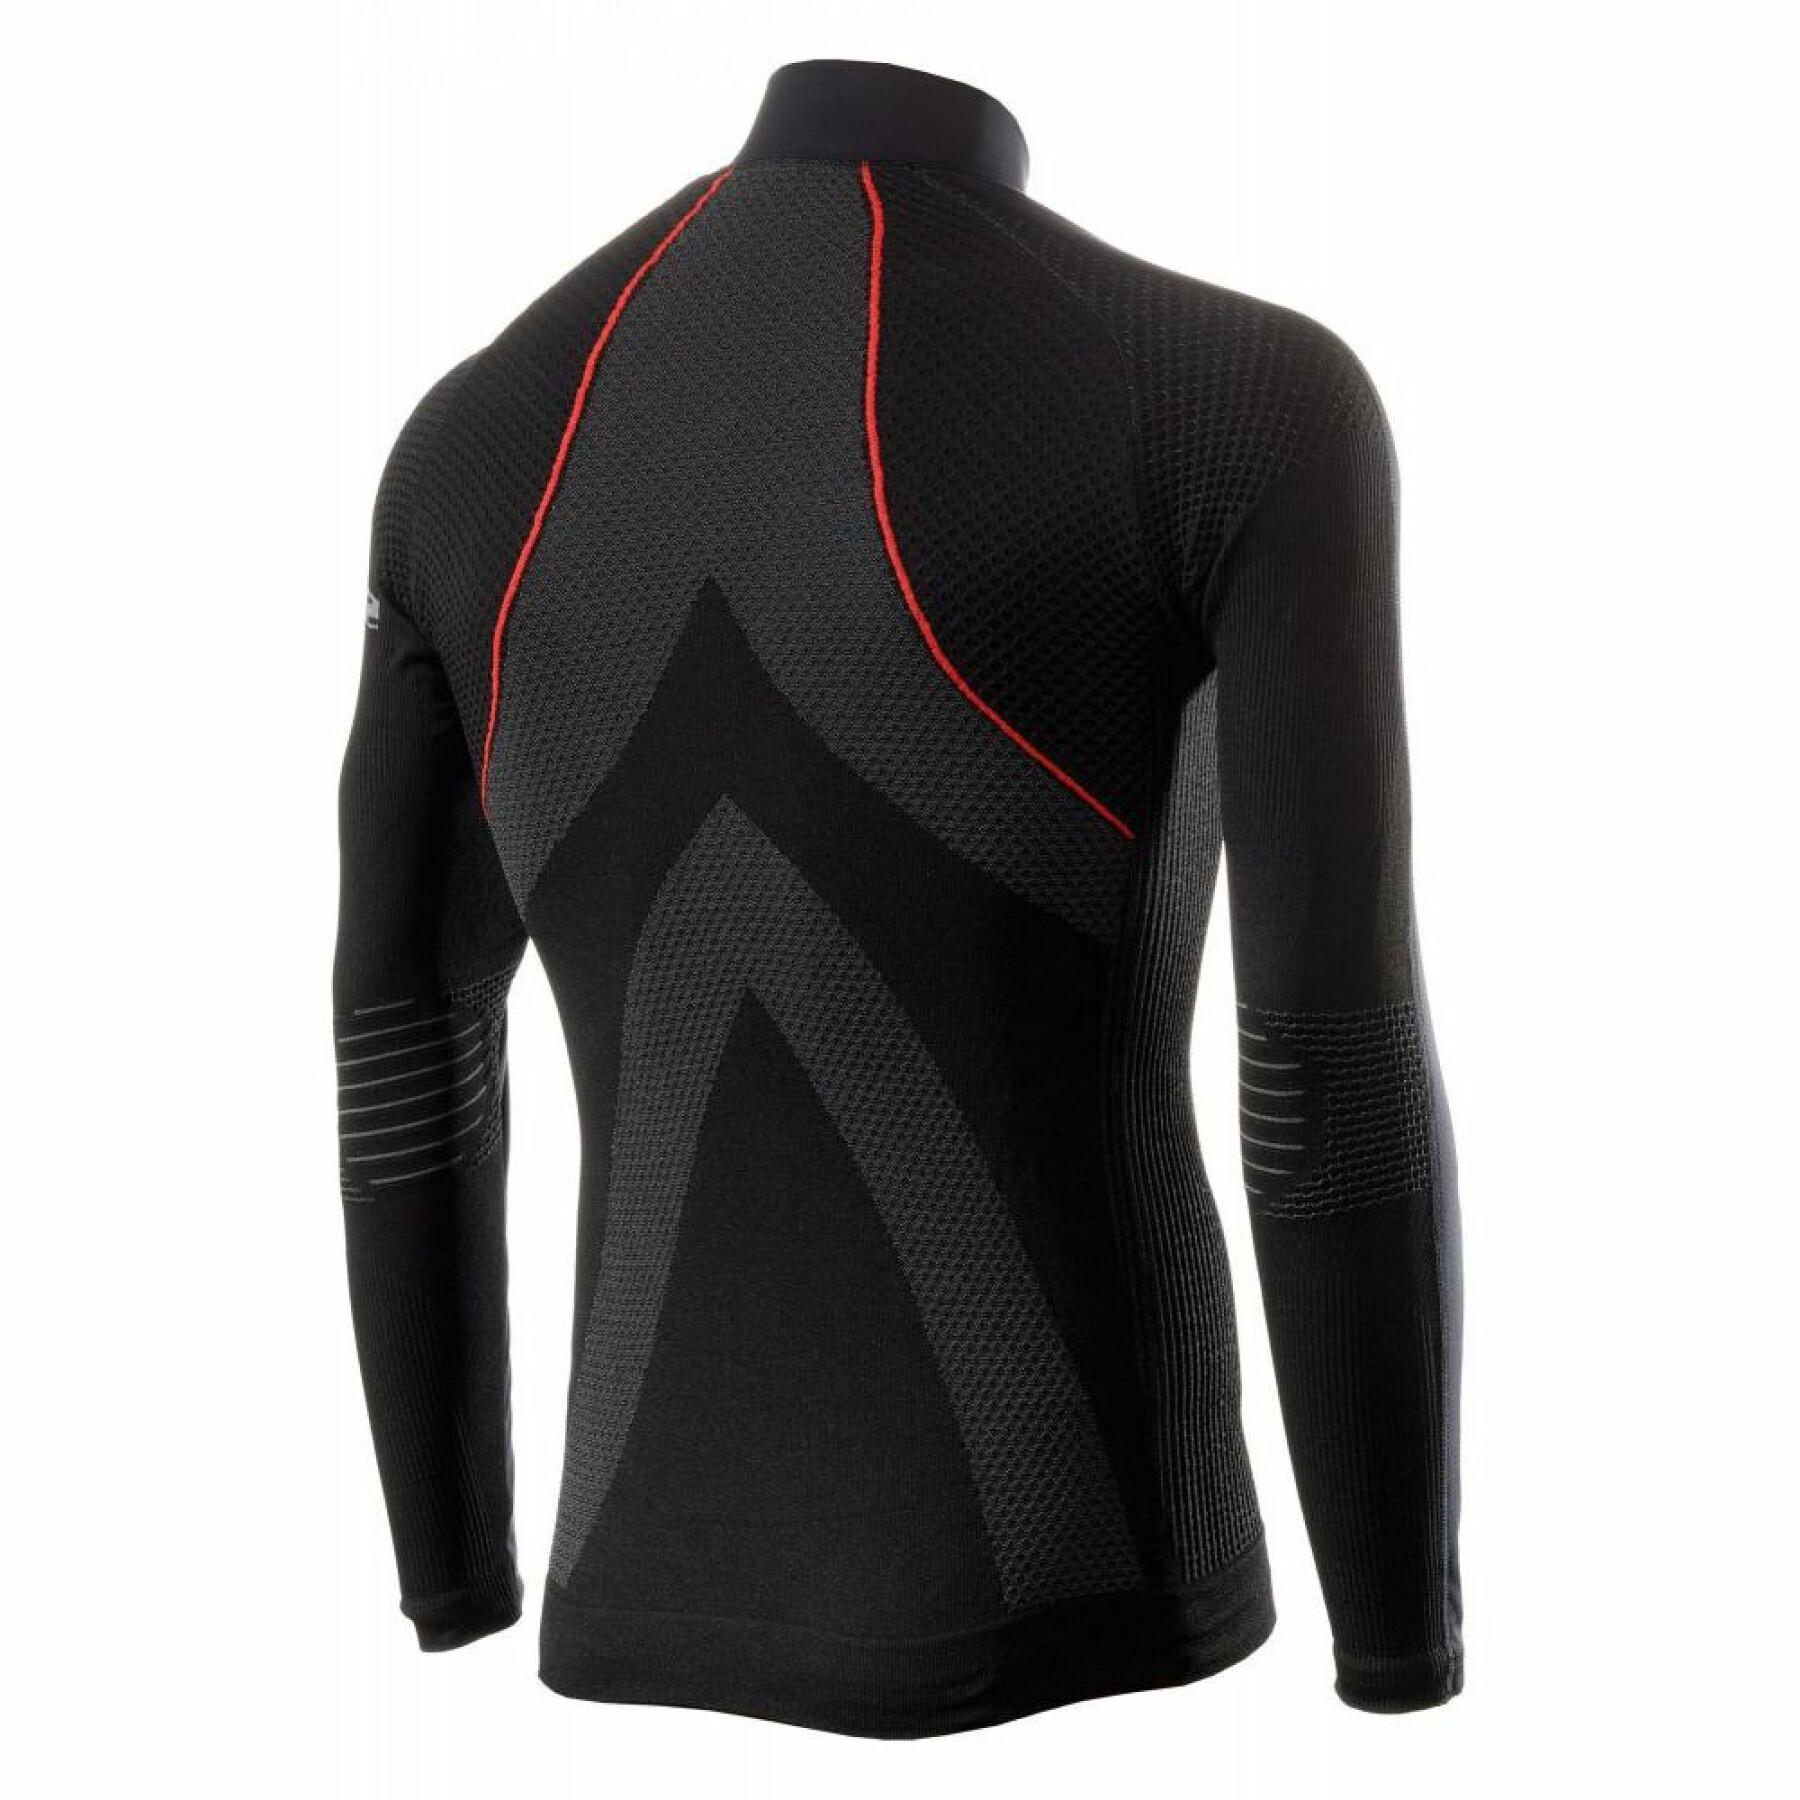 Long-sleeved motorcycle jersey Sixs wind WT